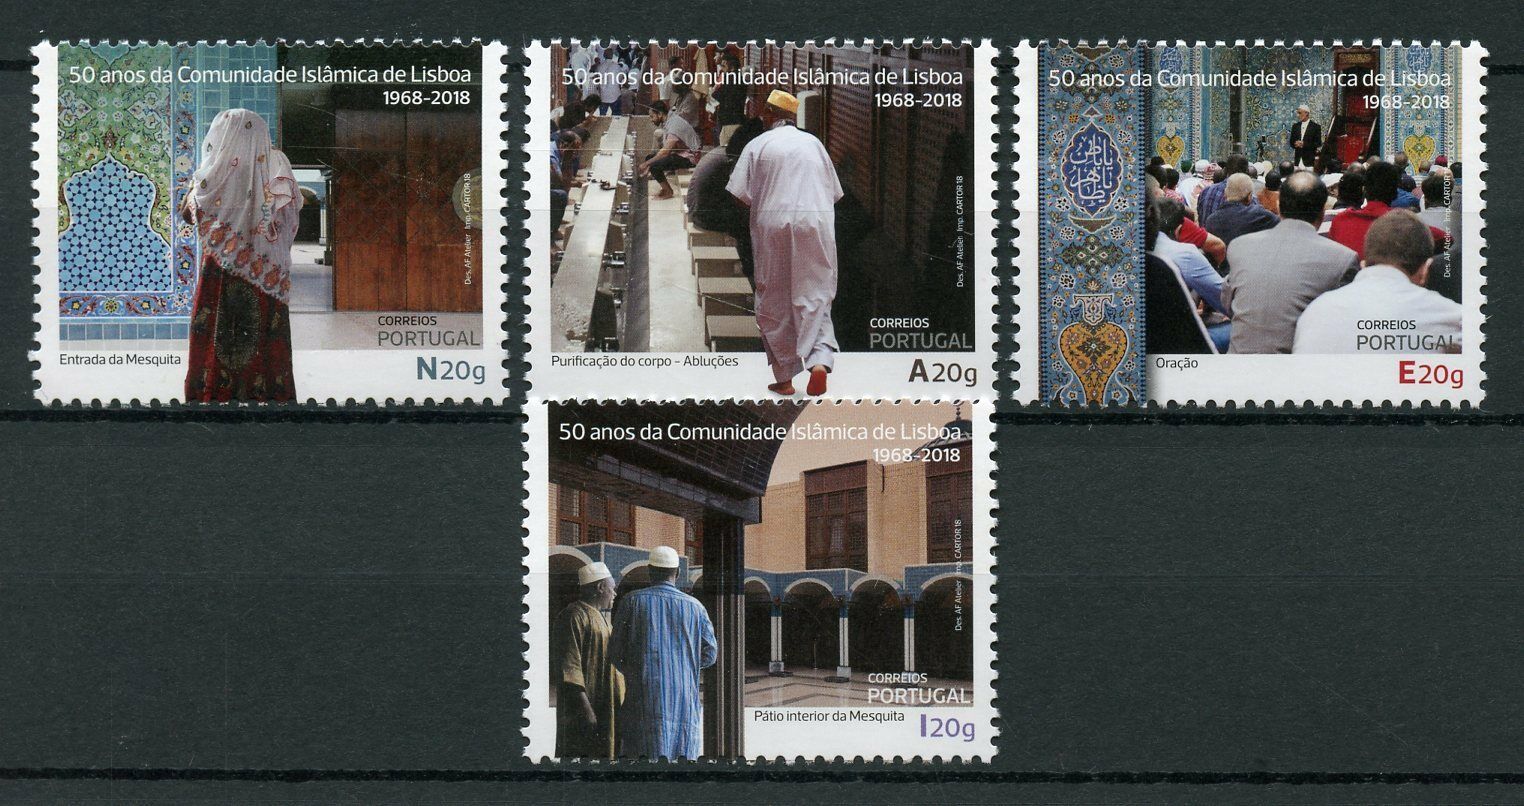 Portugal 2018 MNH Islamic Community in Lisbon 50 Yrs 4v Set Mosques Stamps